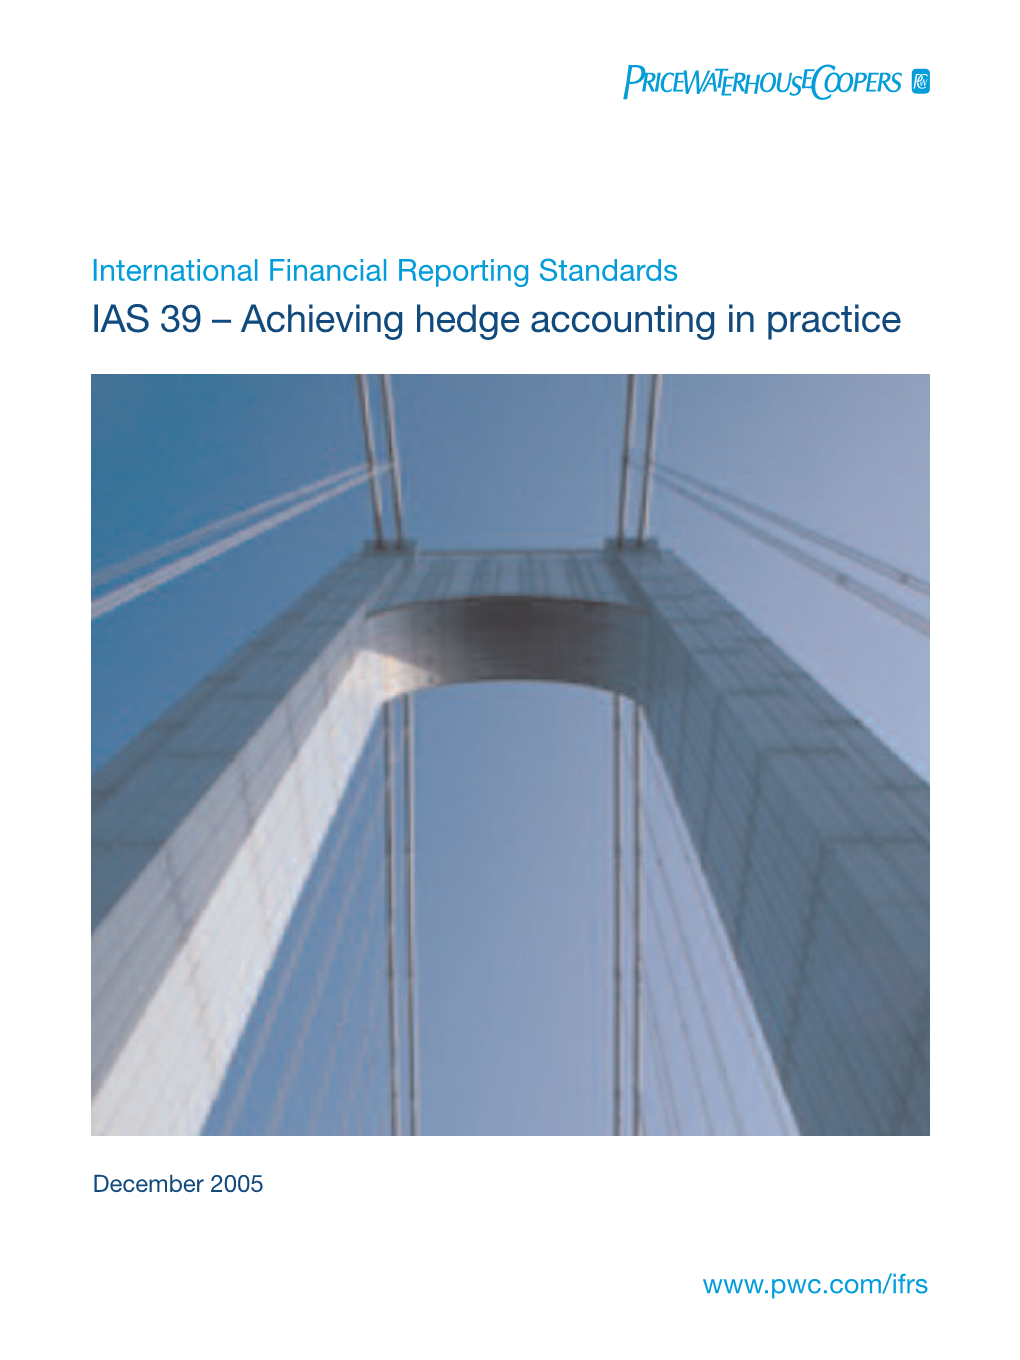 IAS 39 – Achieving Hedge Accounting in Practice